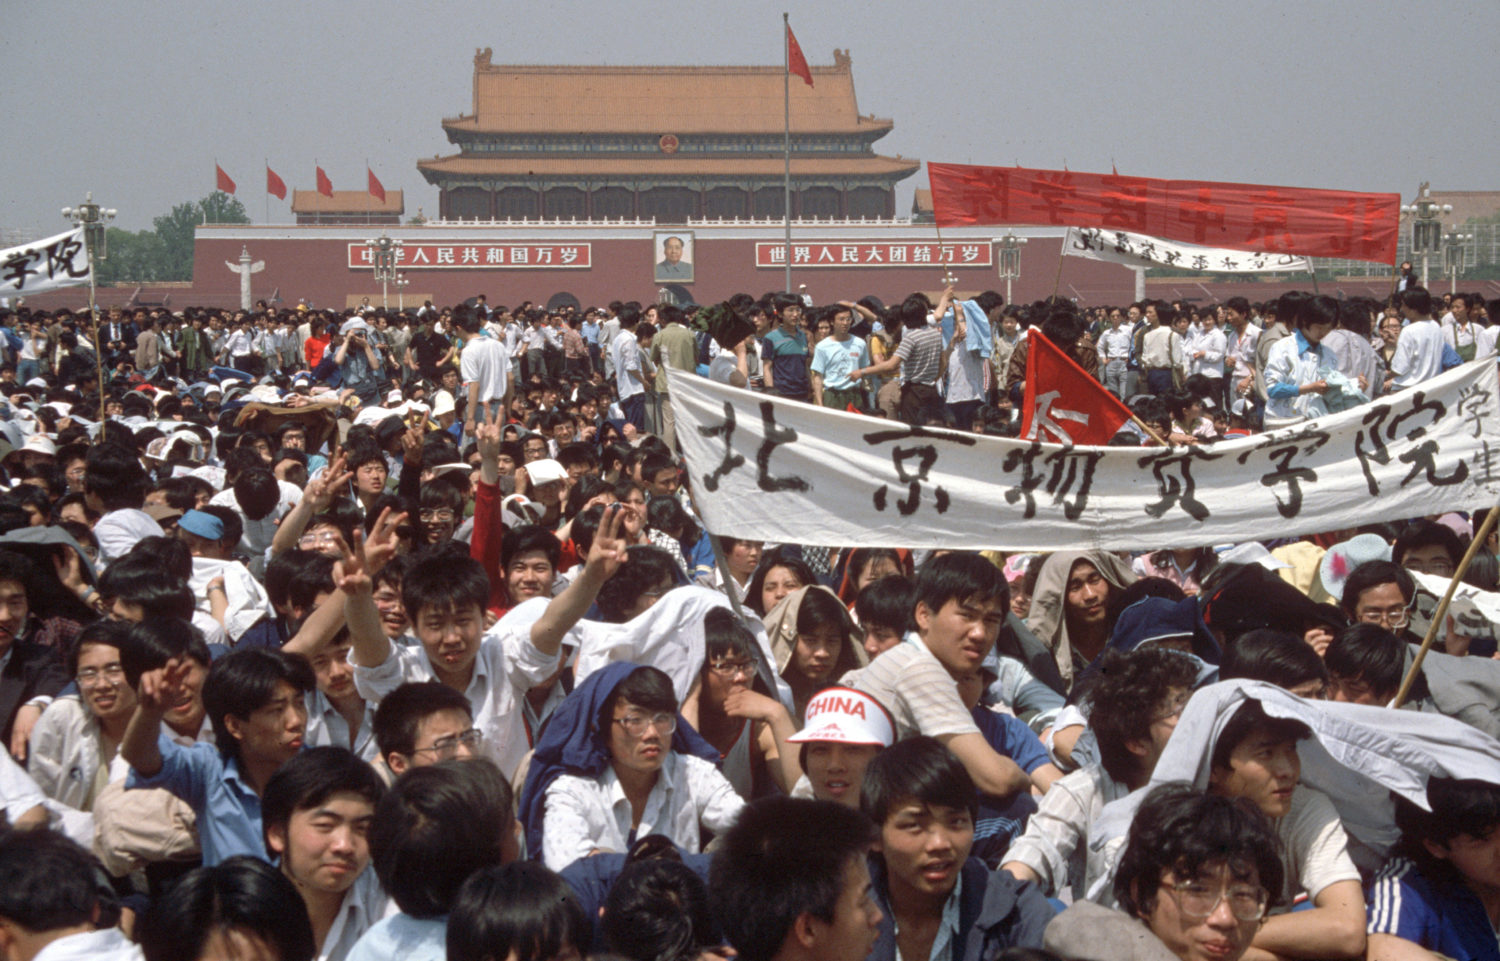 25 Years ago – Protests on Tiananmen Square in Bejing